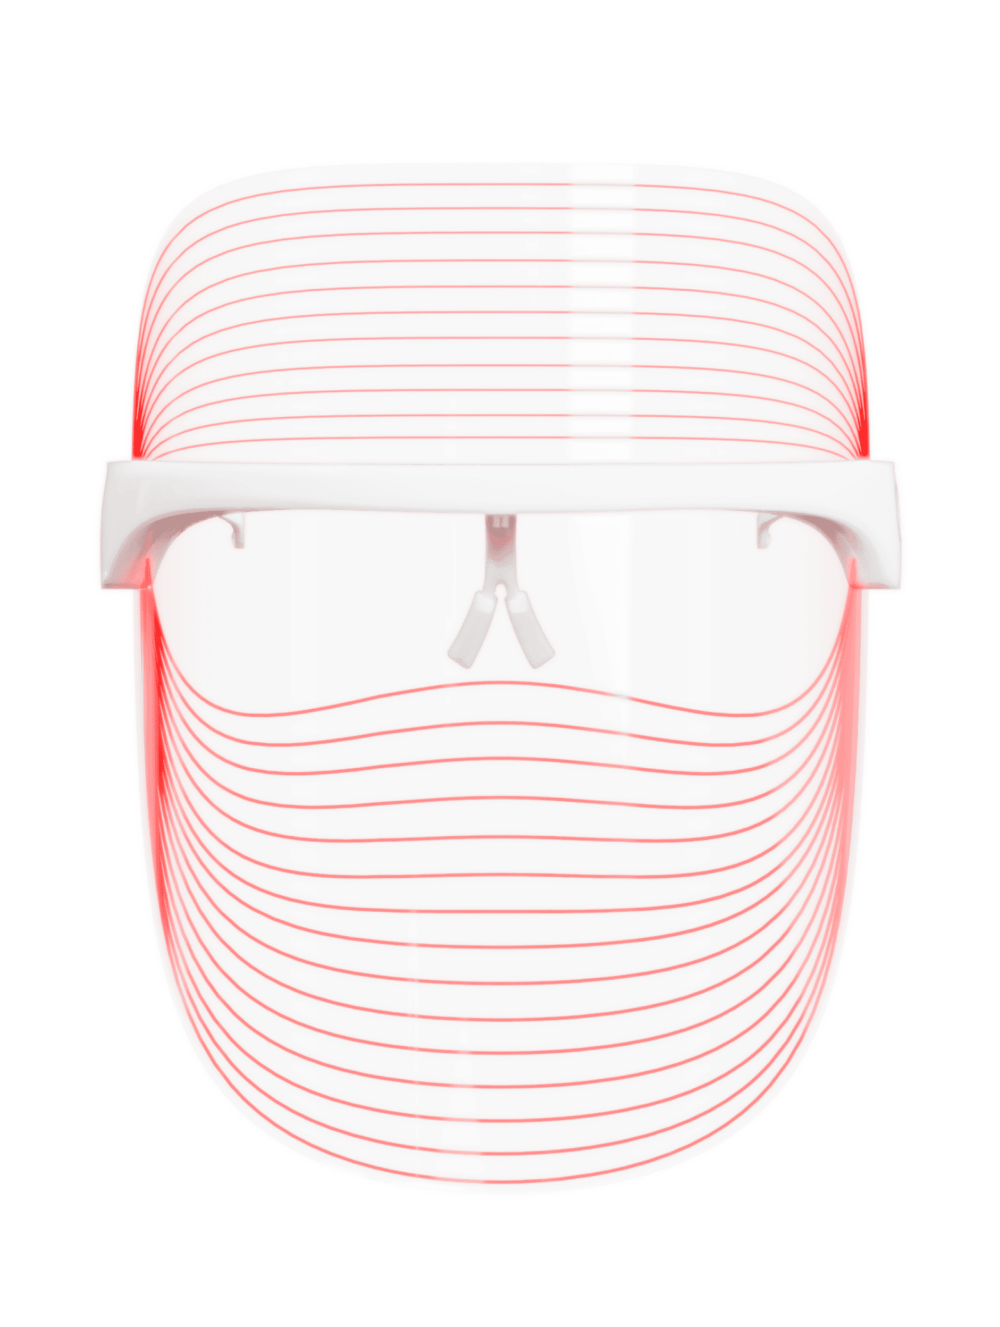 BioLux Light Therapy Mask by My Derma Dream – Official Retailer